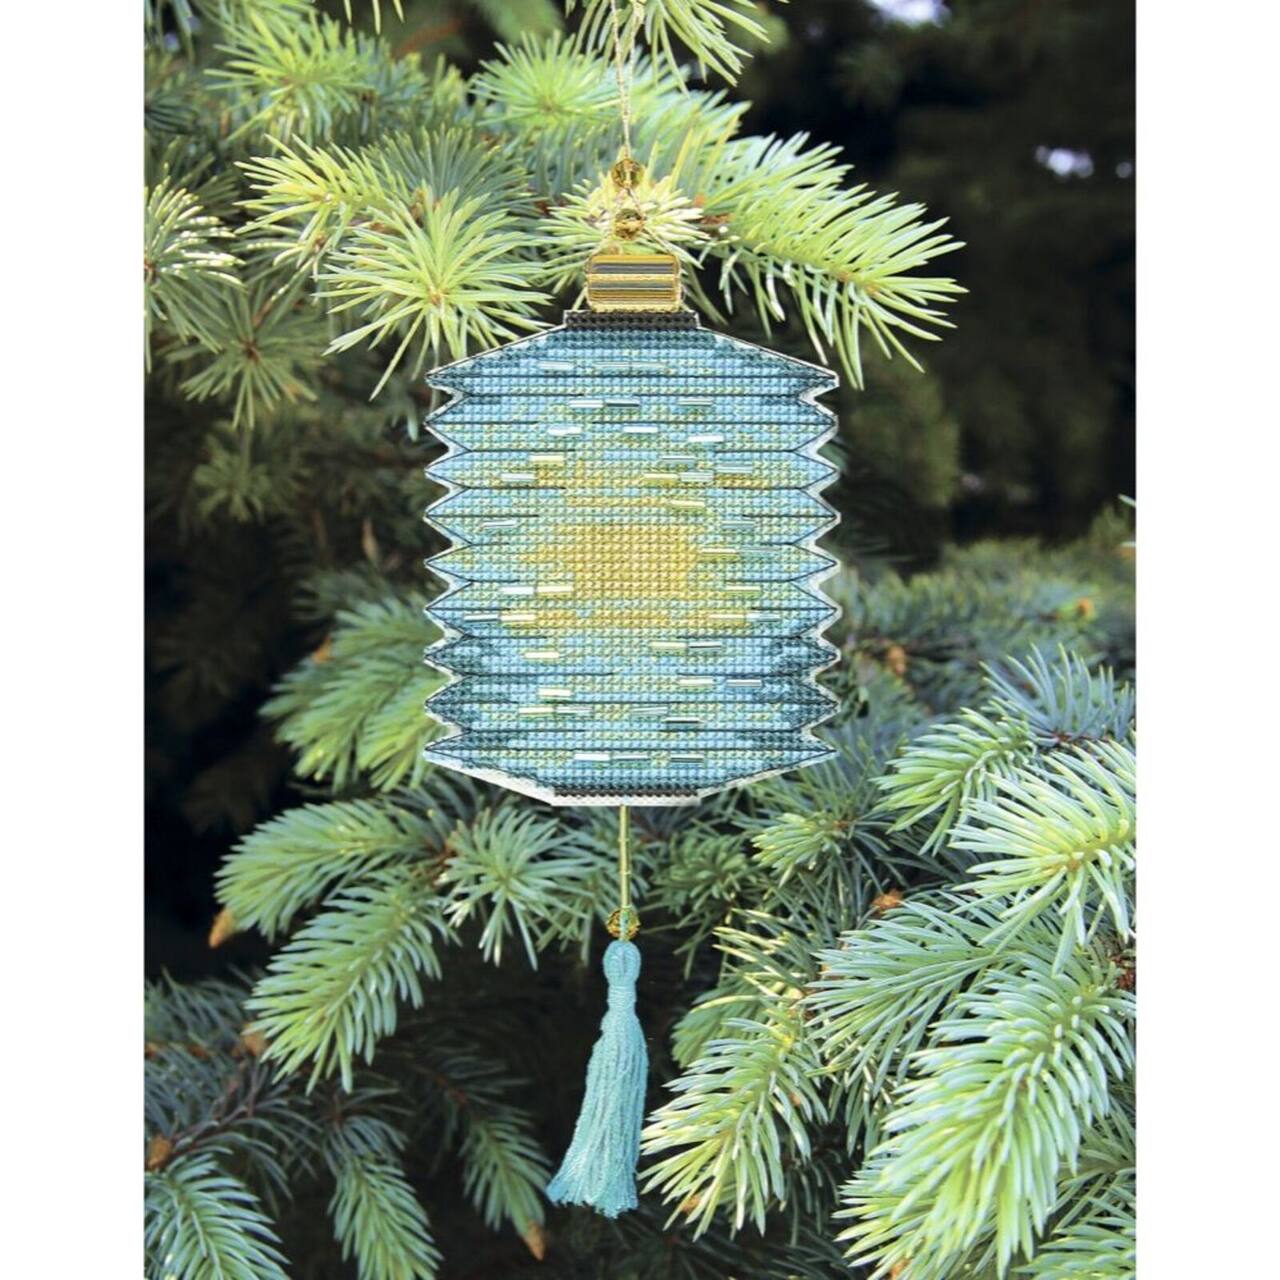 Crystal Art Christmas Tree Toy Plastic Canvas Counted Cross Stitch Kit Set Of Pictures Colorful Lanterns